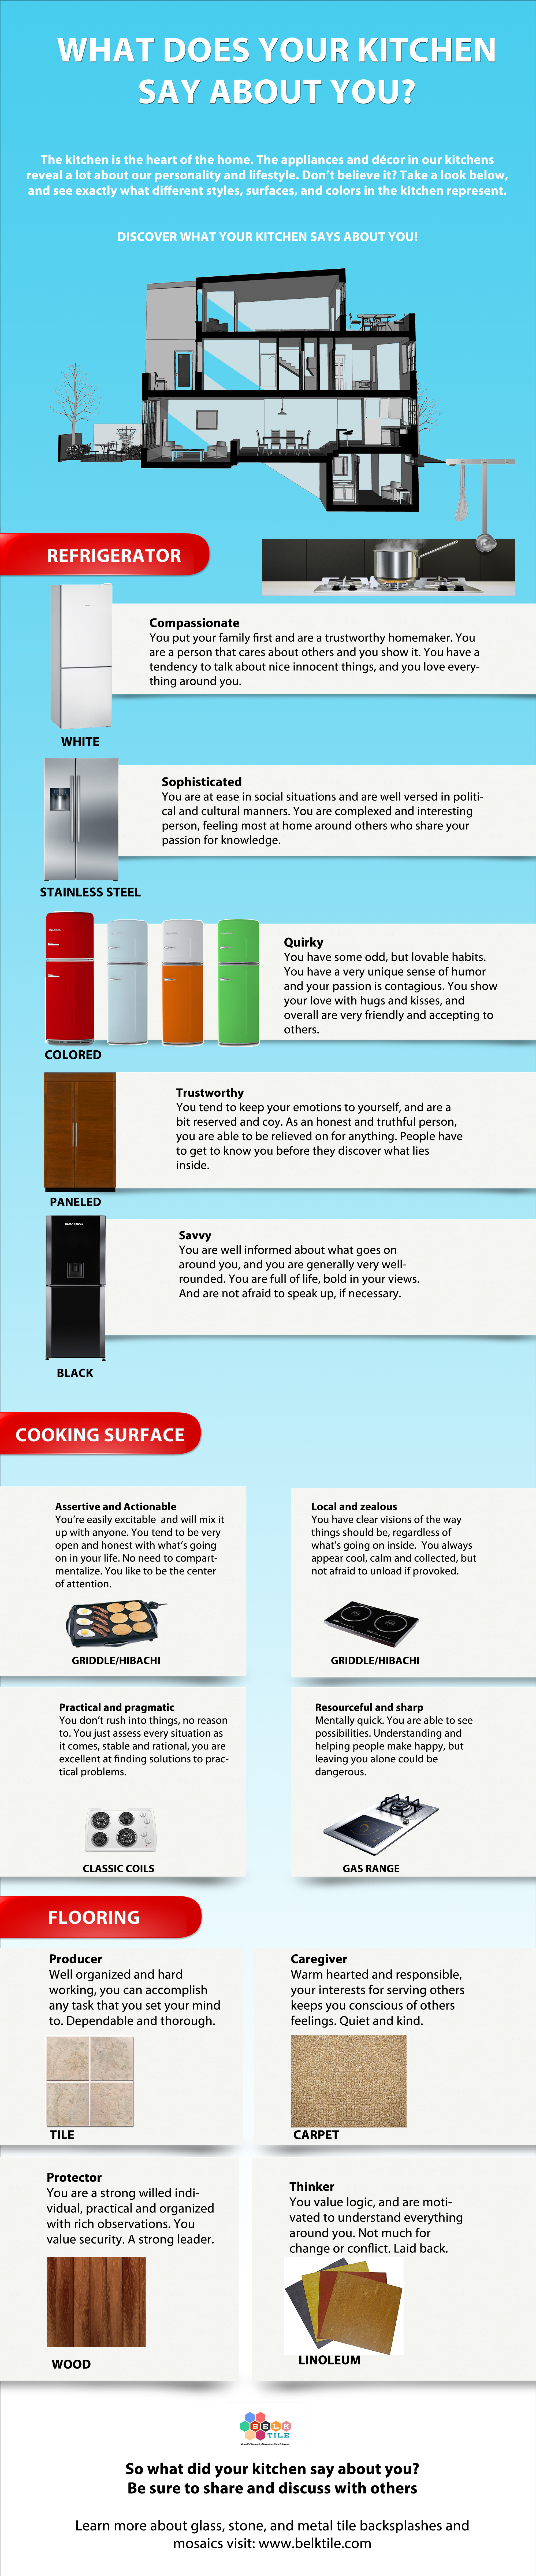 What does your Kitchen say about you infographic